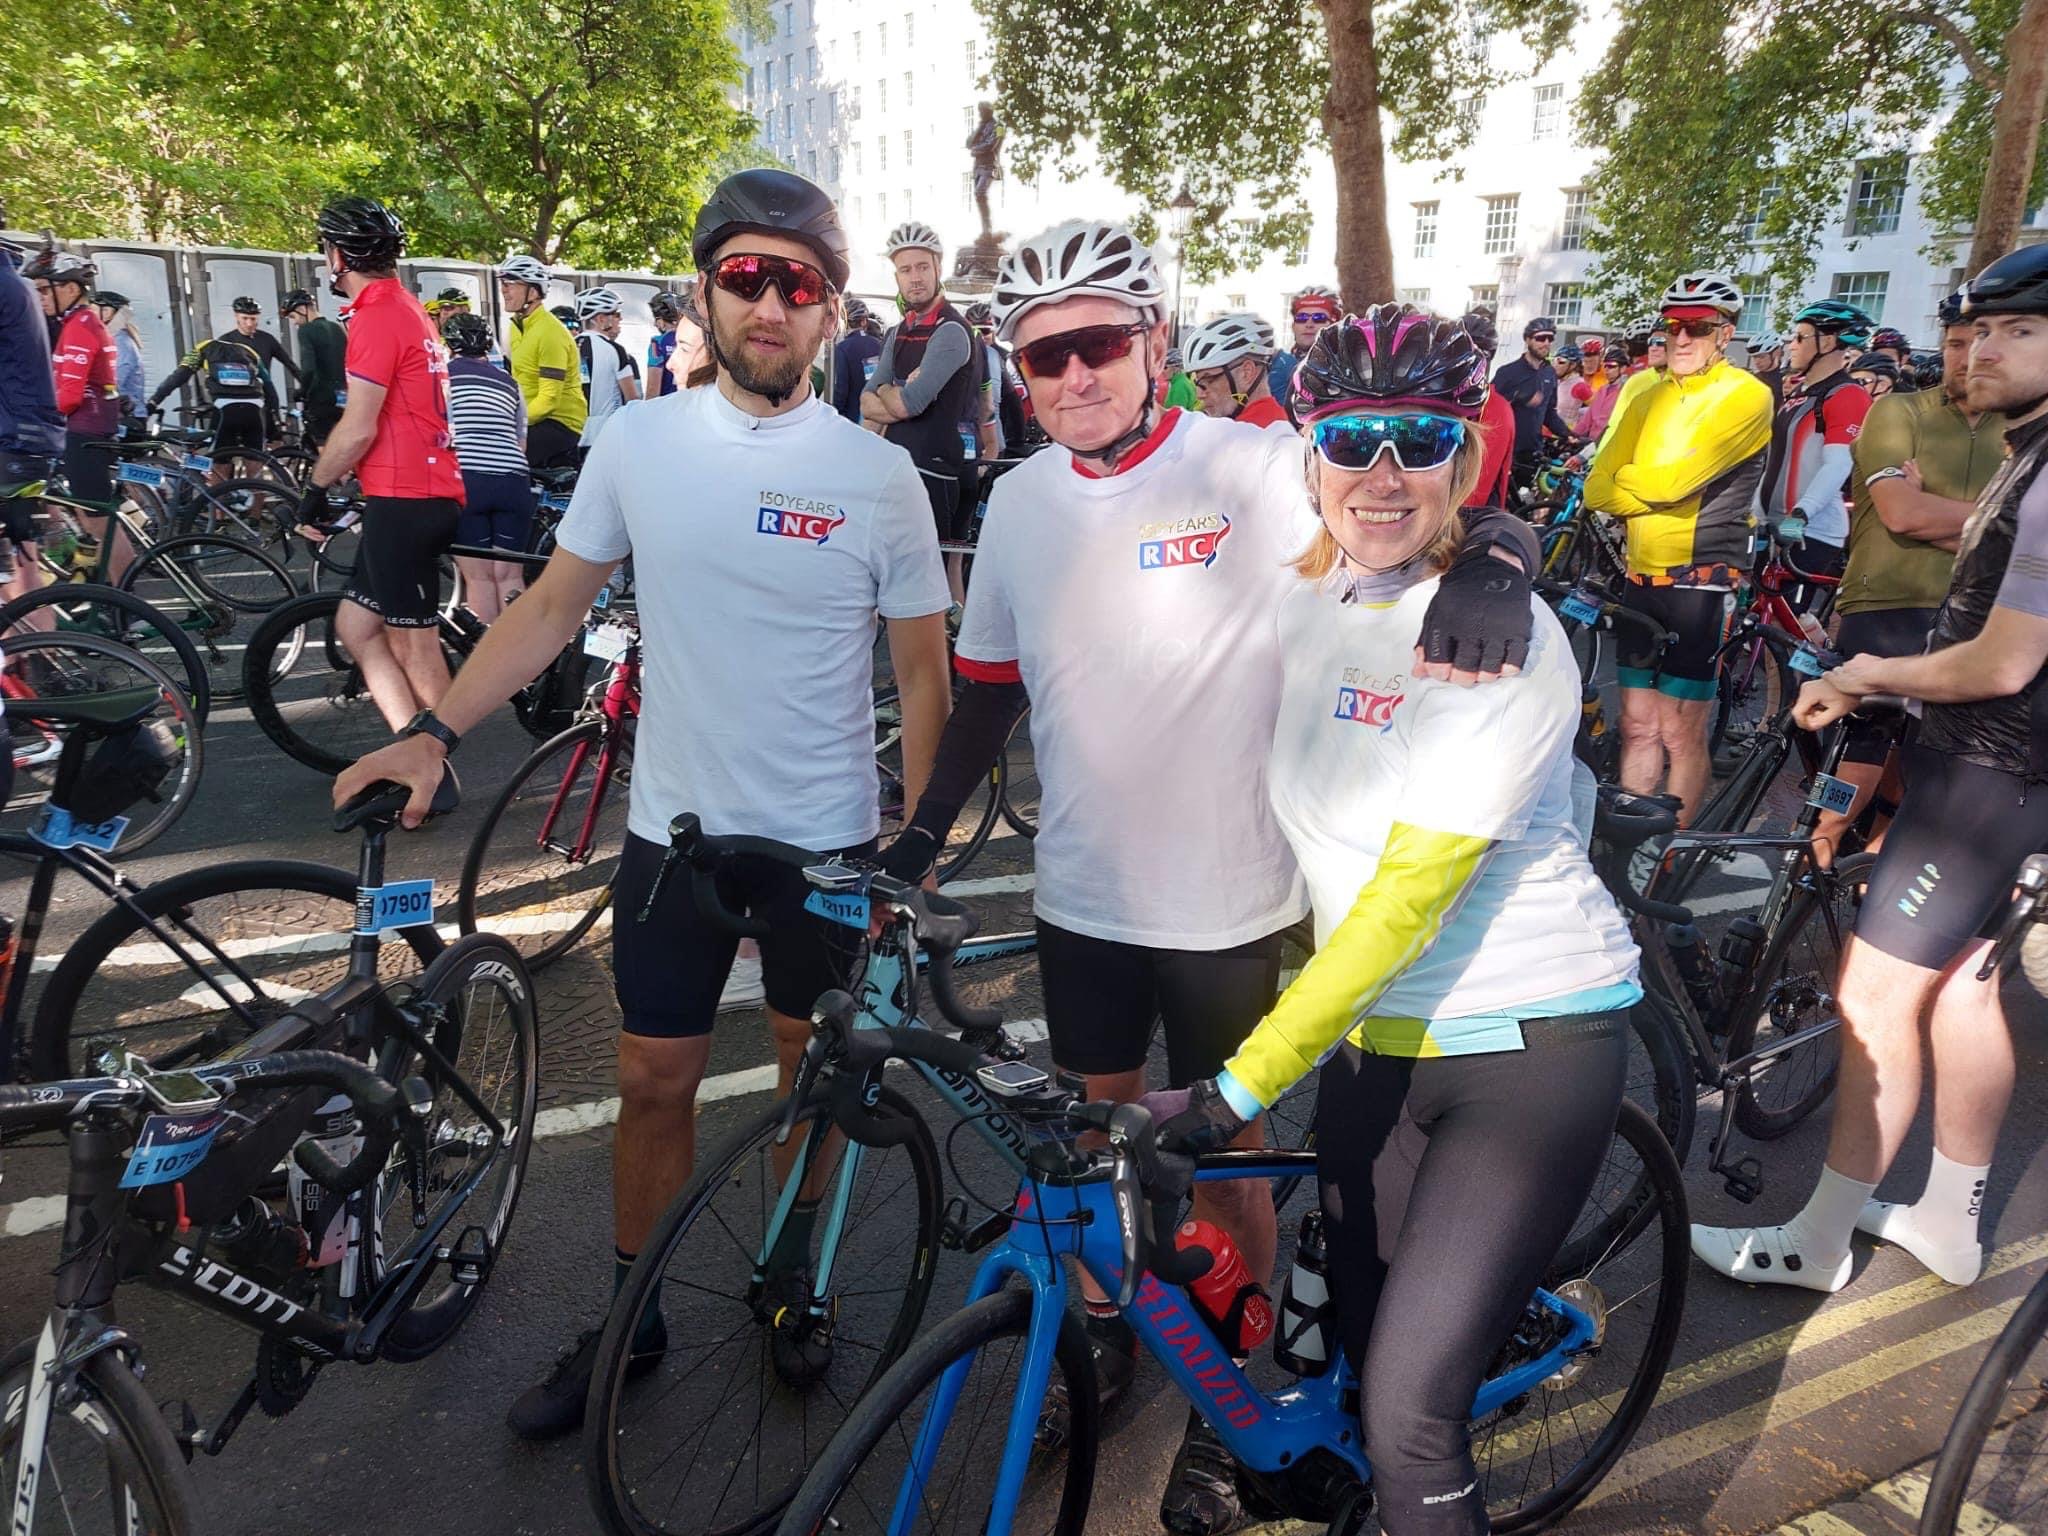 100 miles for 150 years - they did it!